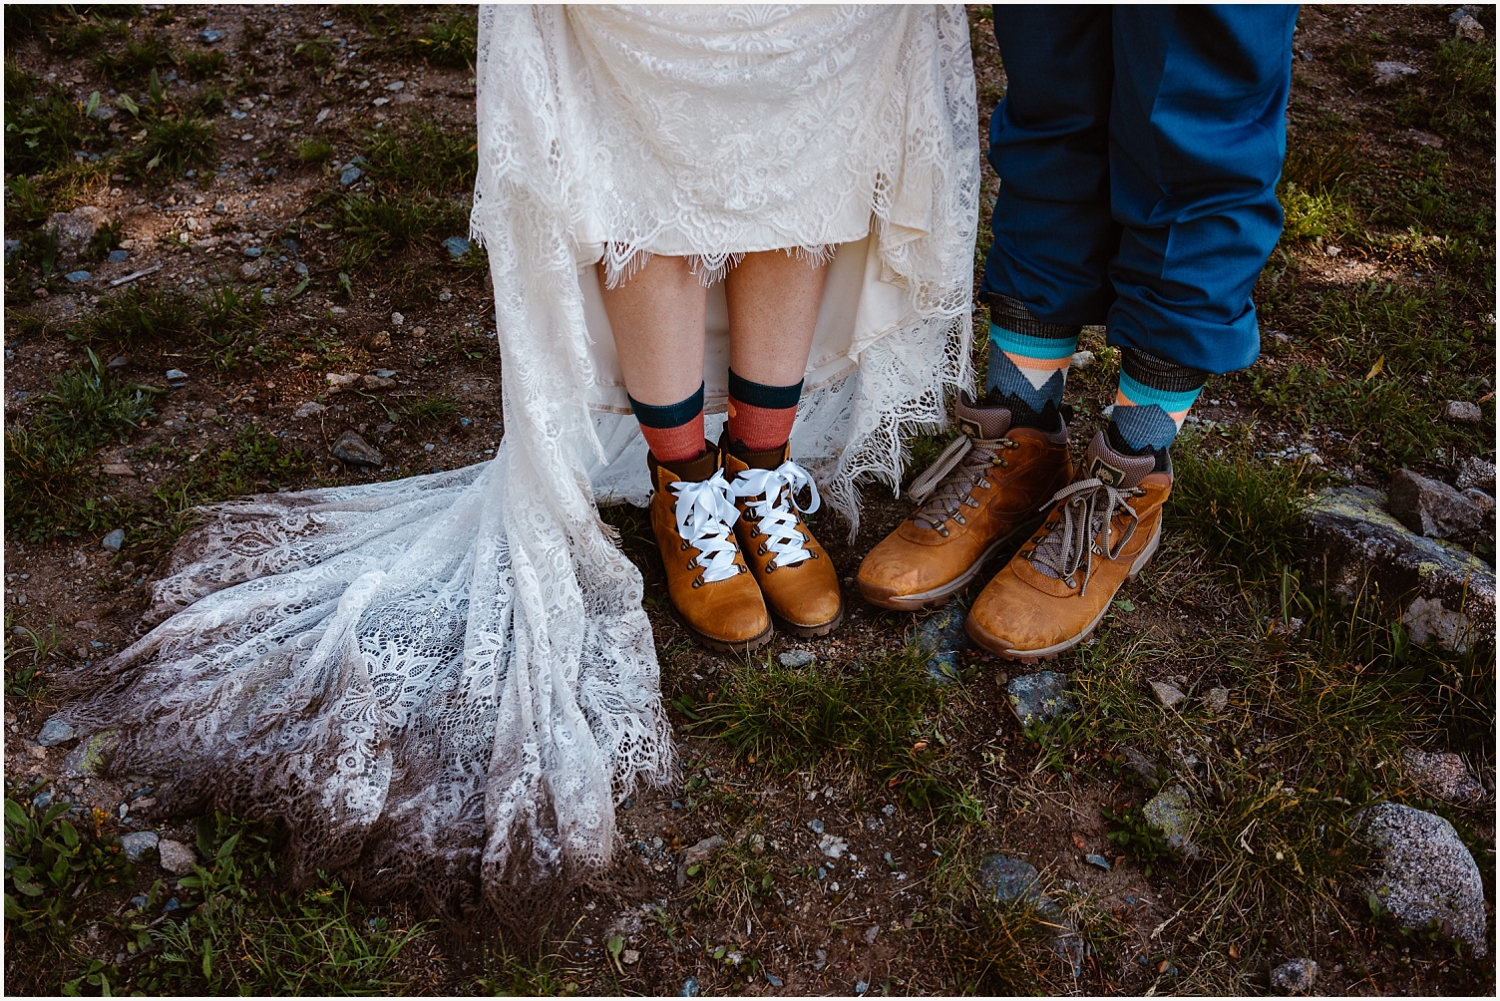 Detailed photo of dirty wedding dress and hiking boots